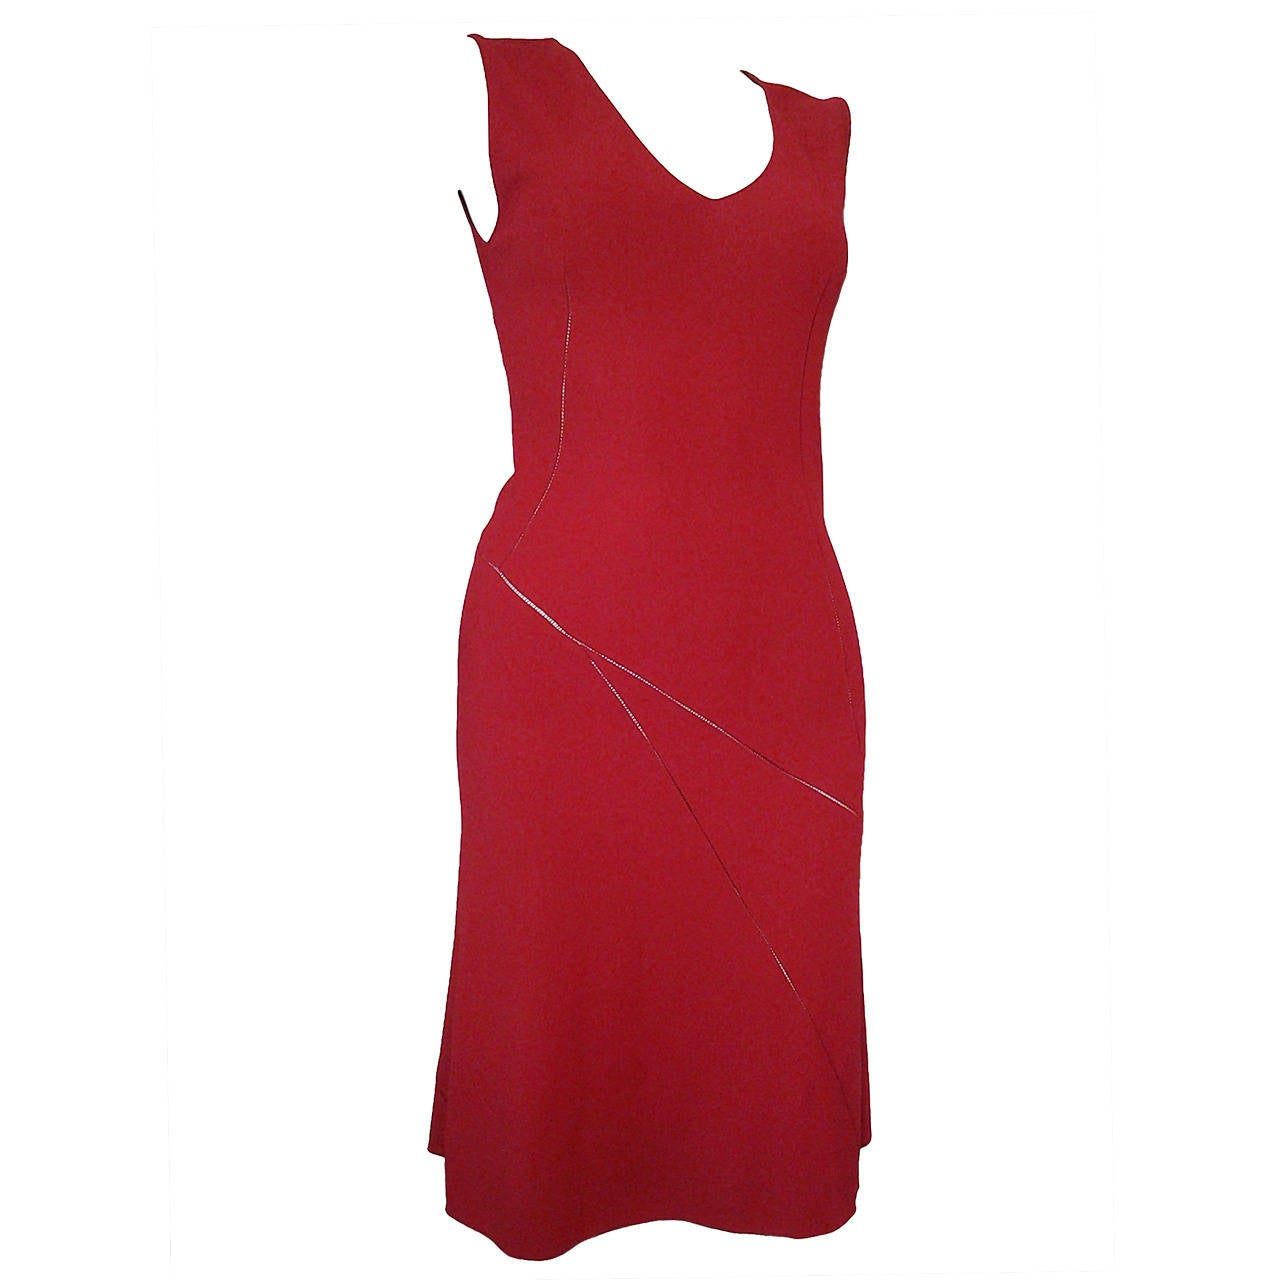 Alaia Cherry Red Rayon Crepe Dress with Asymmetrical Seaming